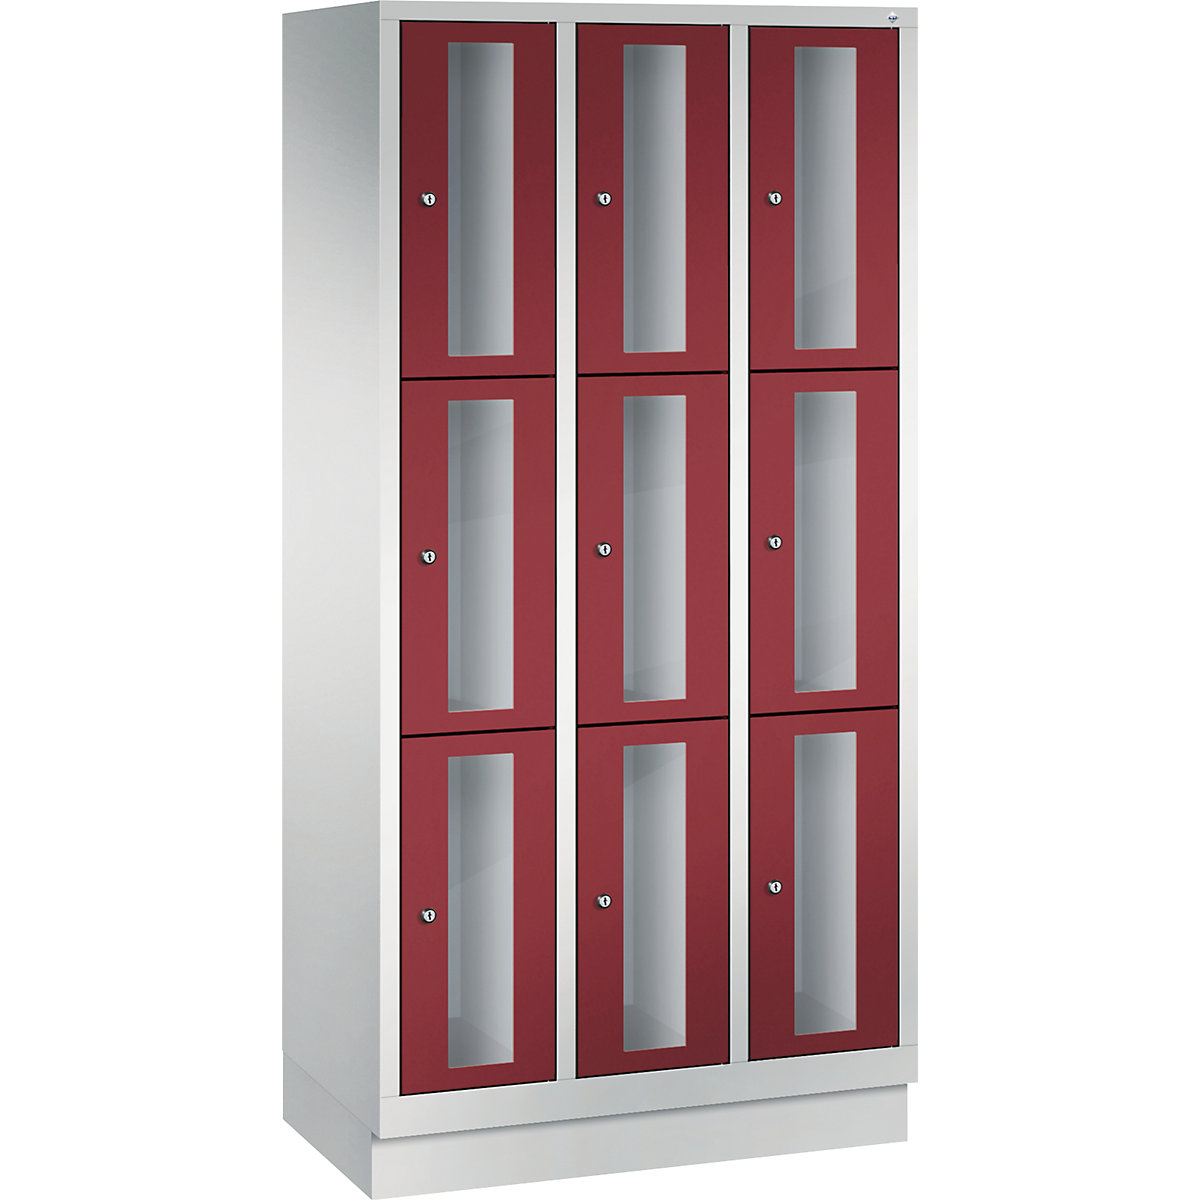 C+P – CLASSIC locker unit, compartment height 510 mm, with plinth, 9 compartments, width 900 mm, ruby red door